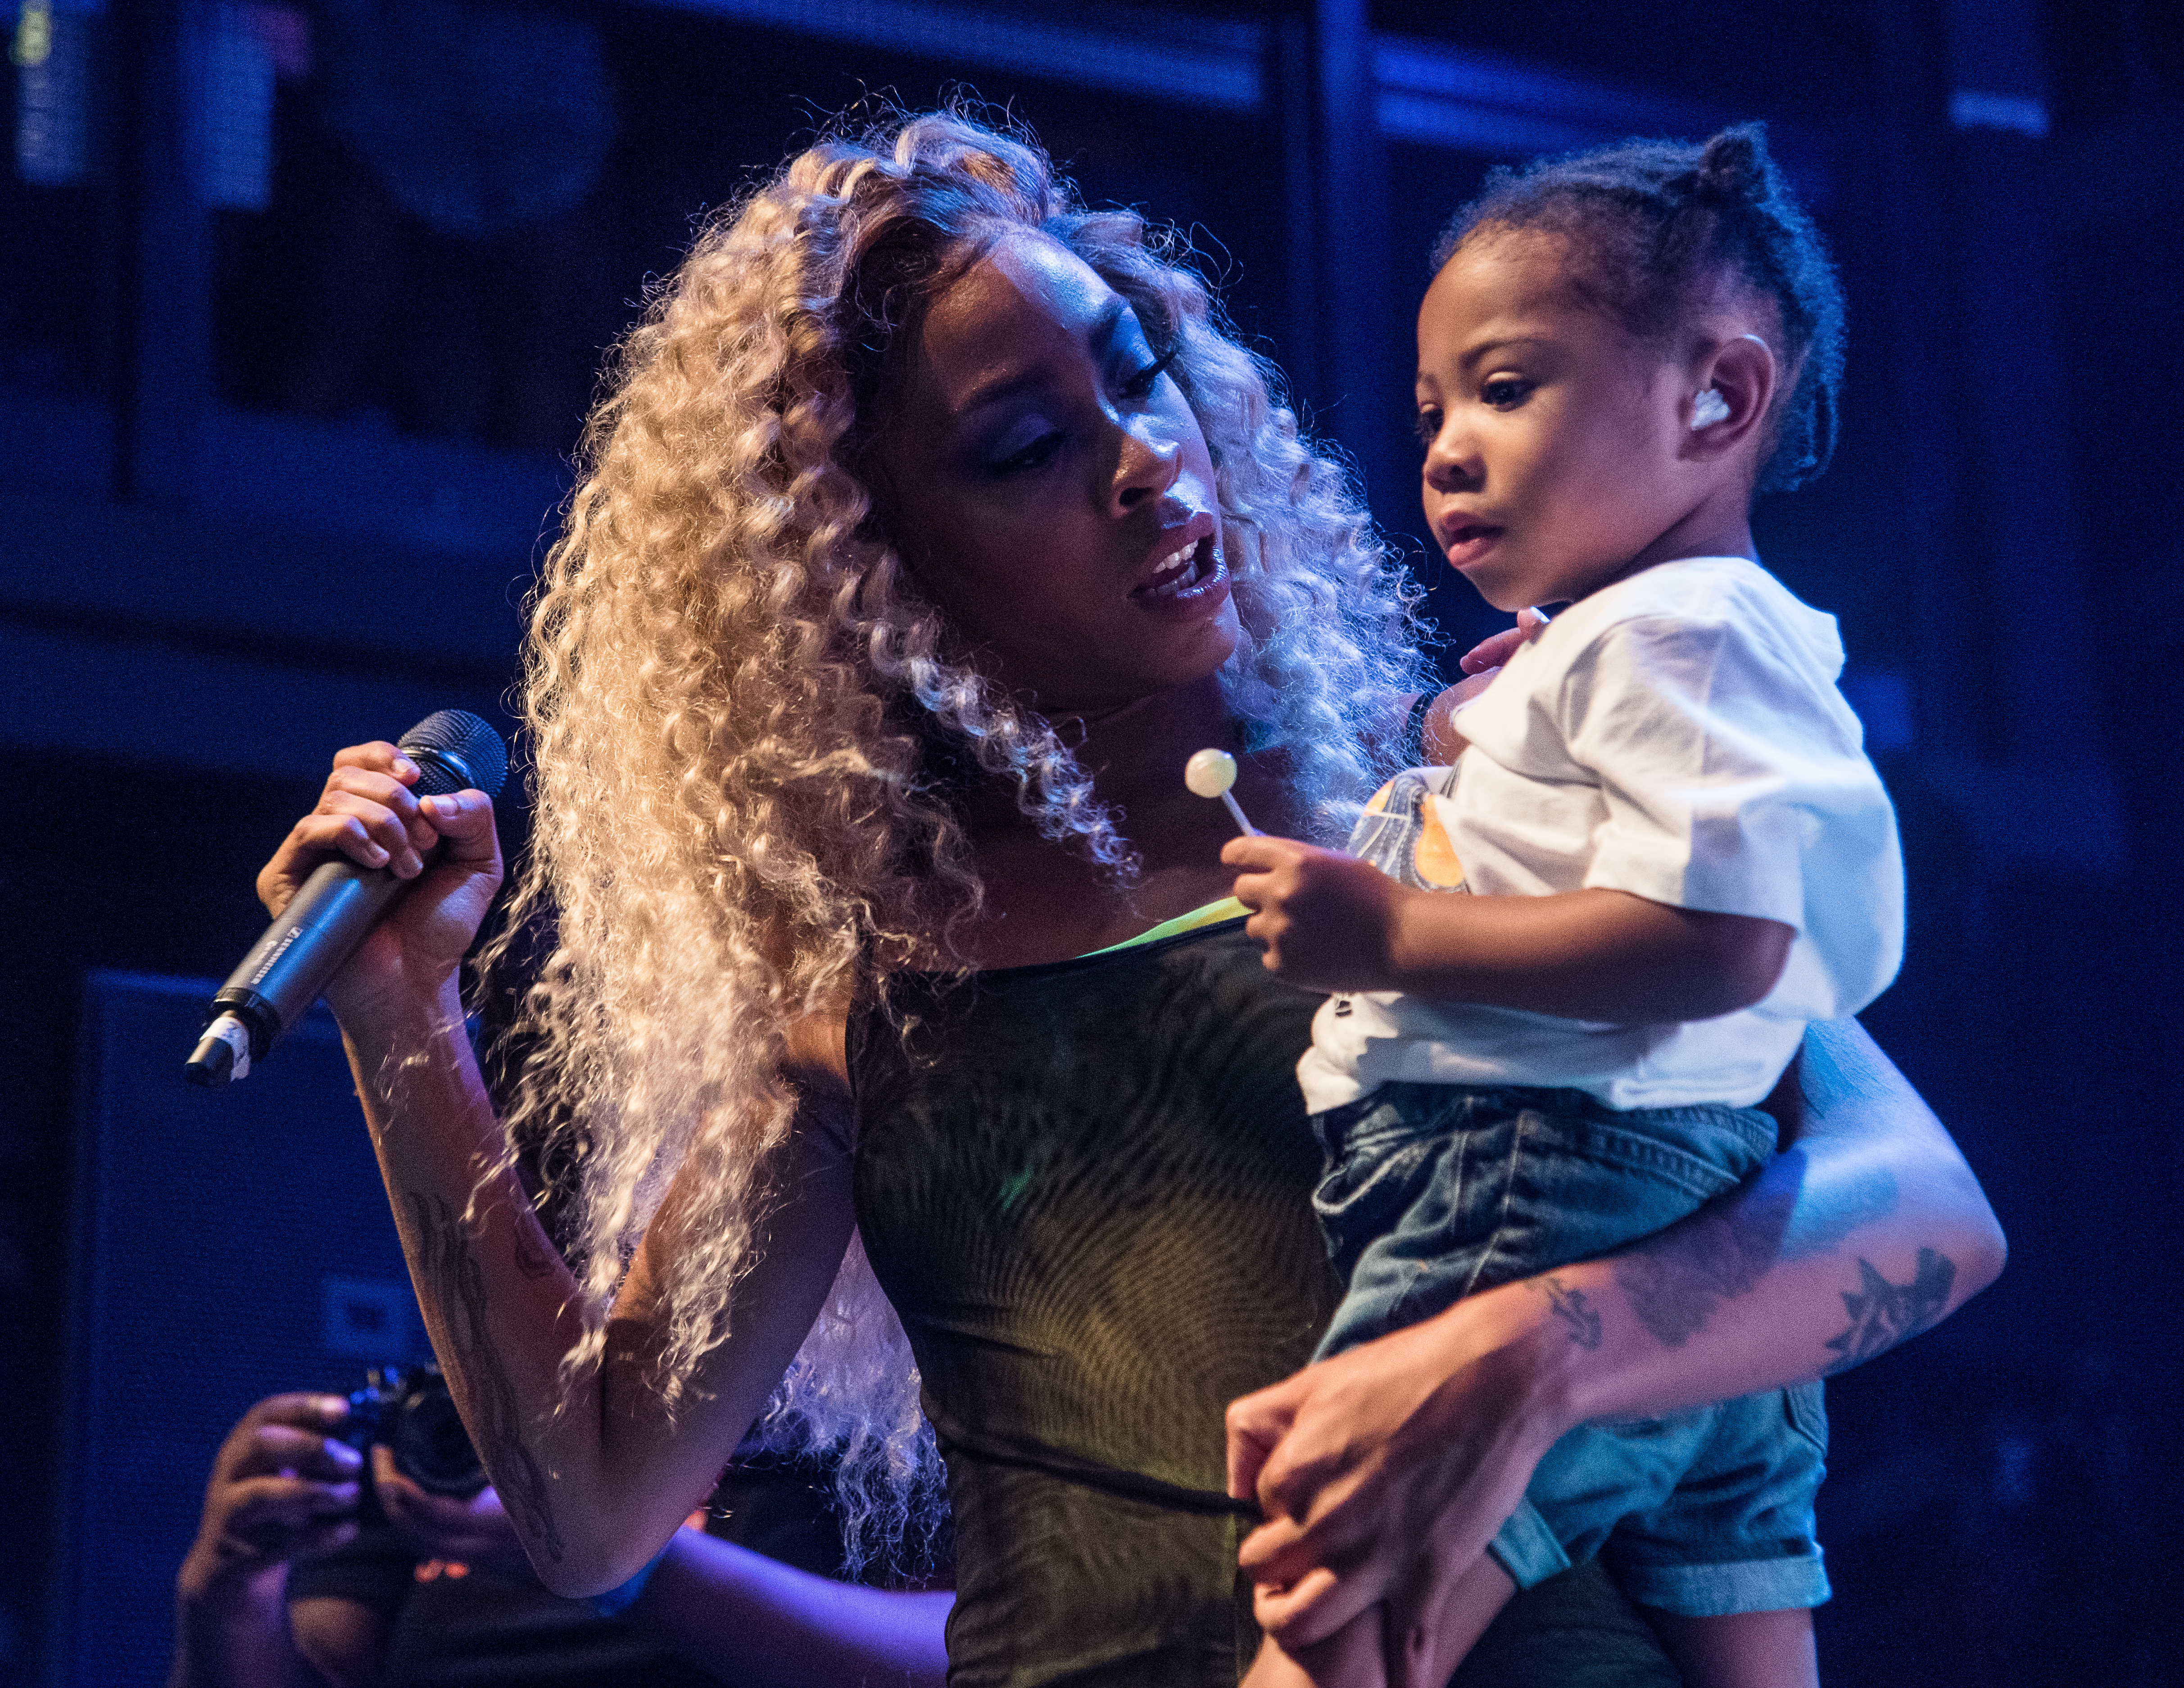 Rico Nasty (Maria-Cecilia Simone Kelly ) on stage with her son Tuesday evening at the Fillmore Silver Spring.